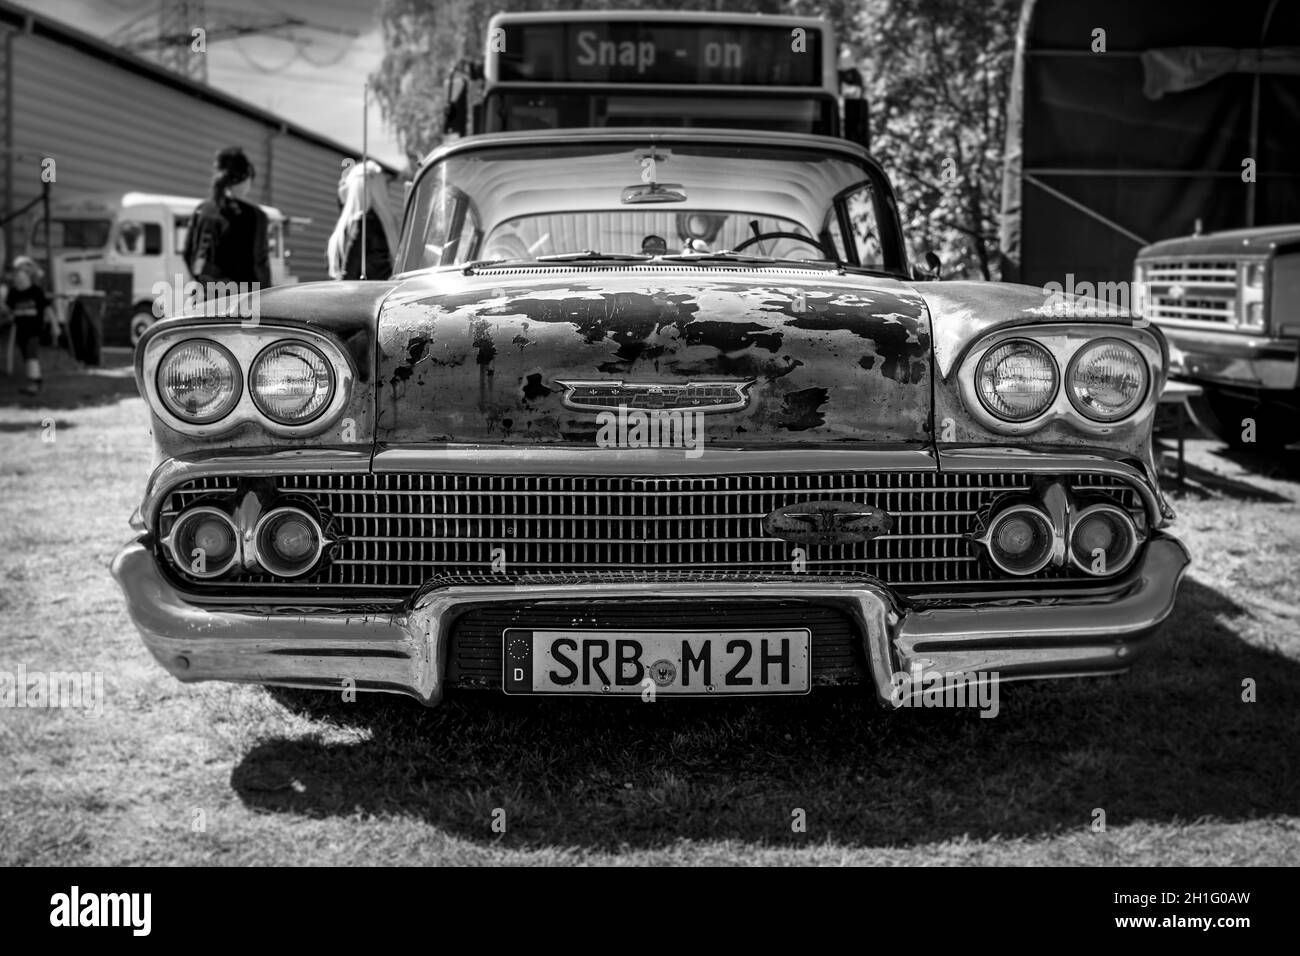 BERLIN - MAY 05, 2018: Full-size car Chevrolet Bel Air Coupe (Third generation). Black and white. Stock Photo